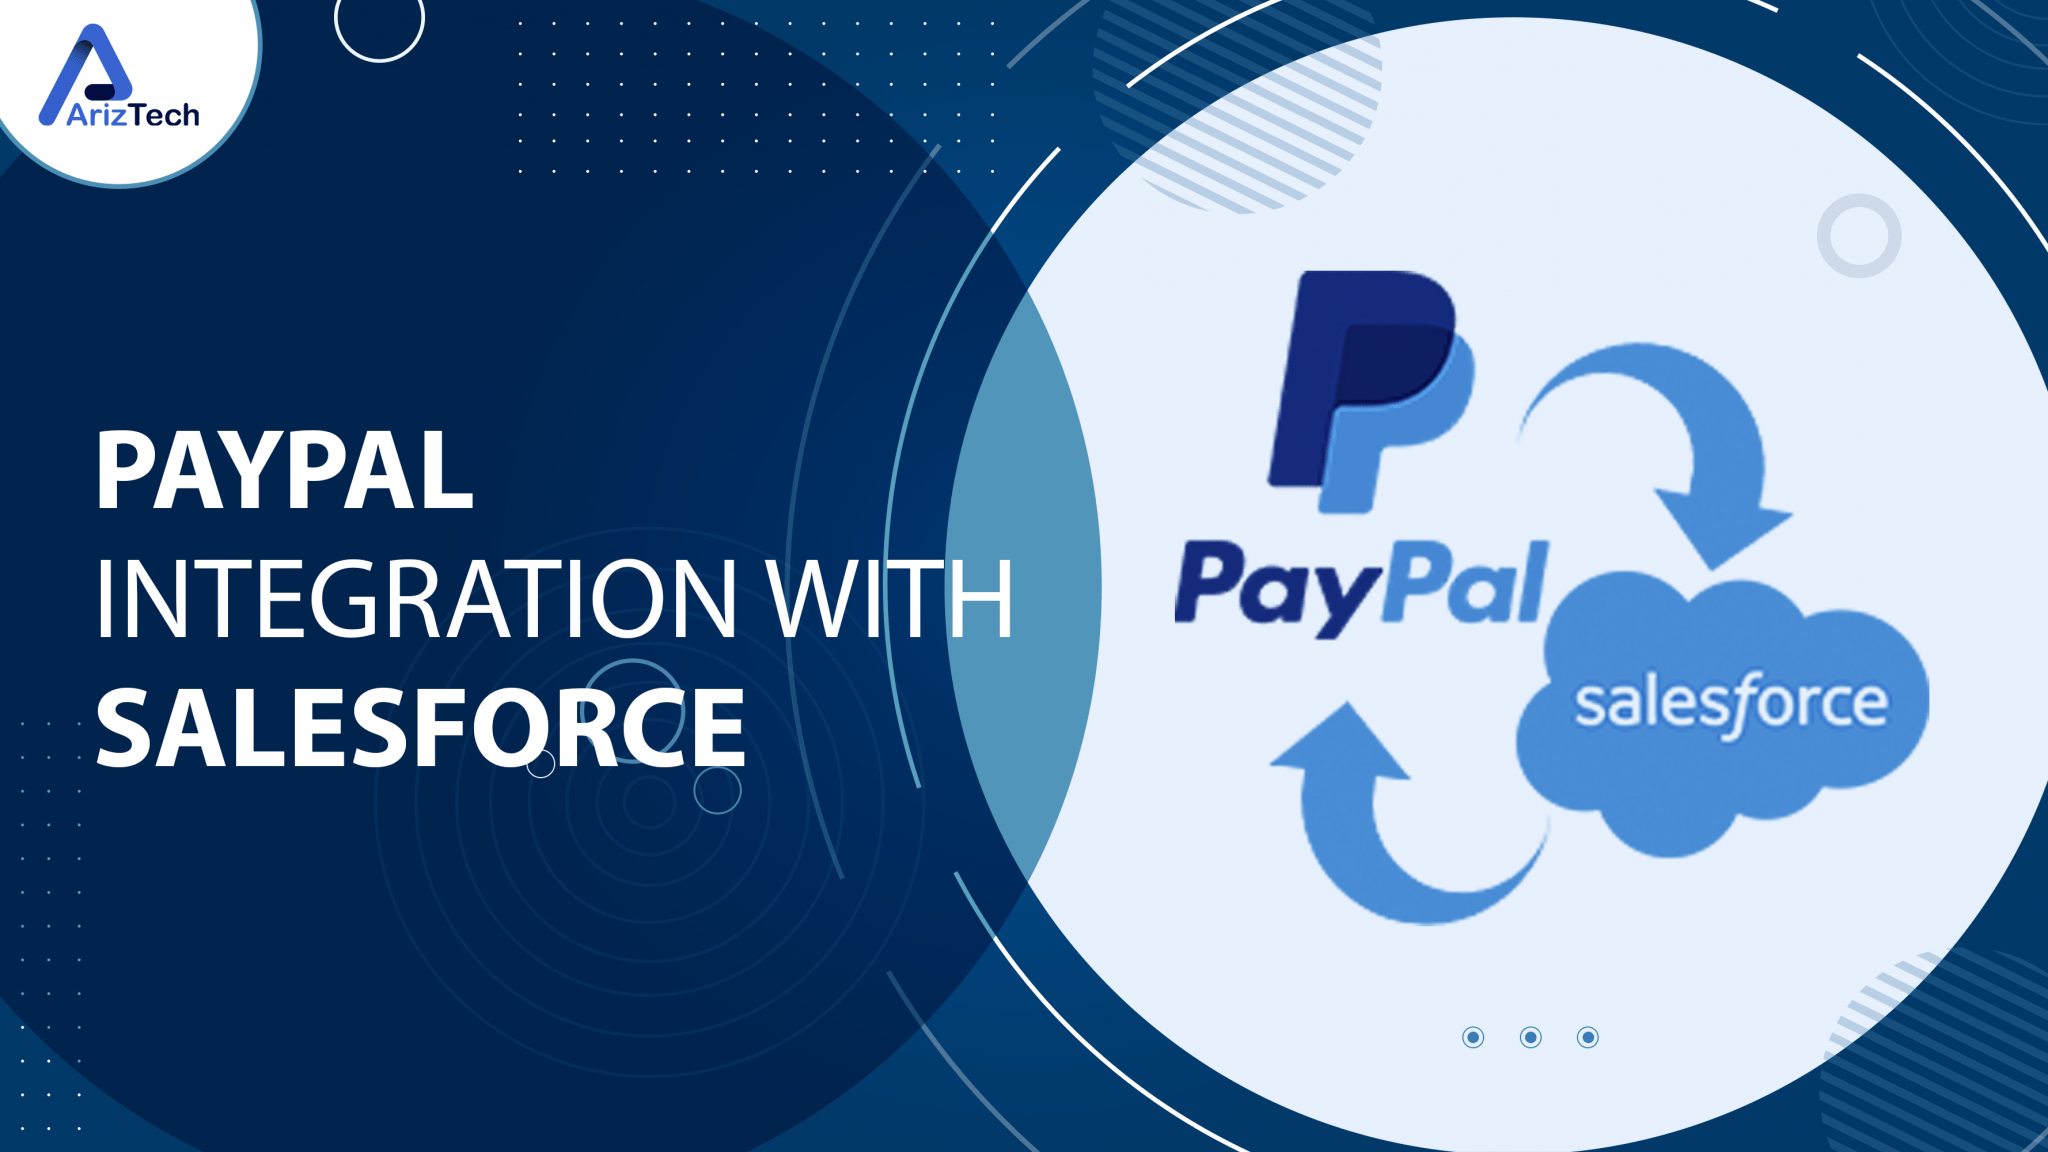 Paypal Integration With Salesforce Salesforce Paypal Integration